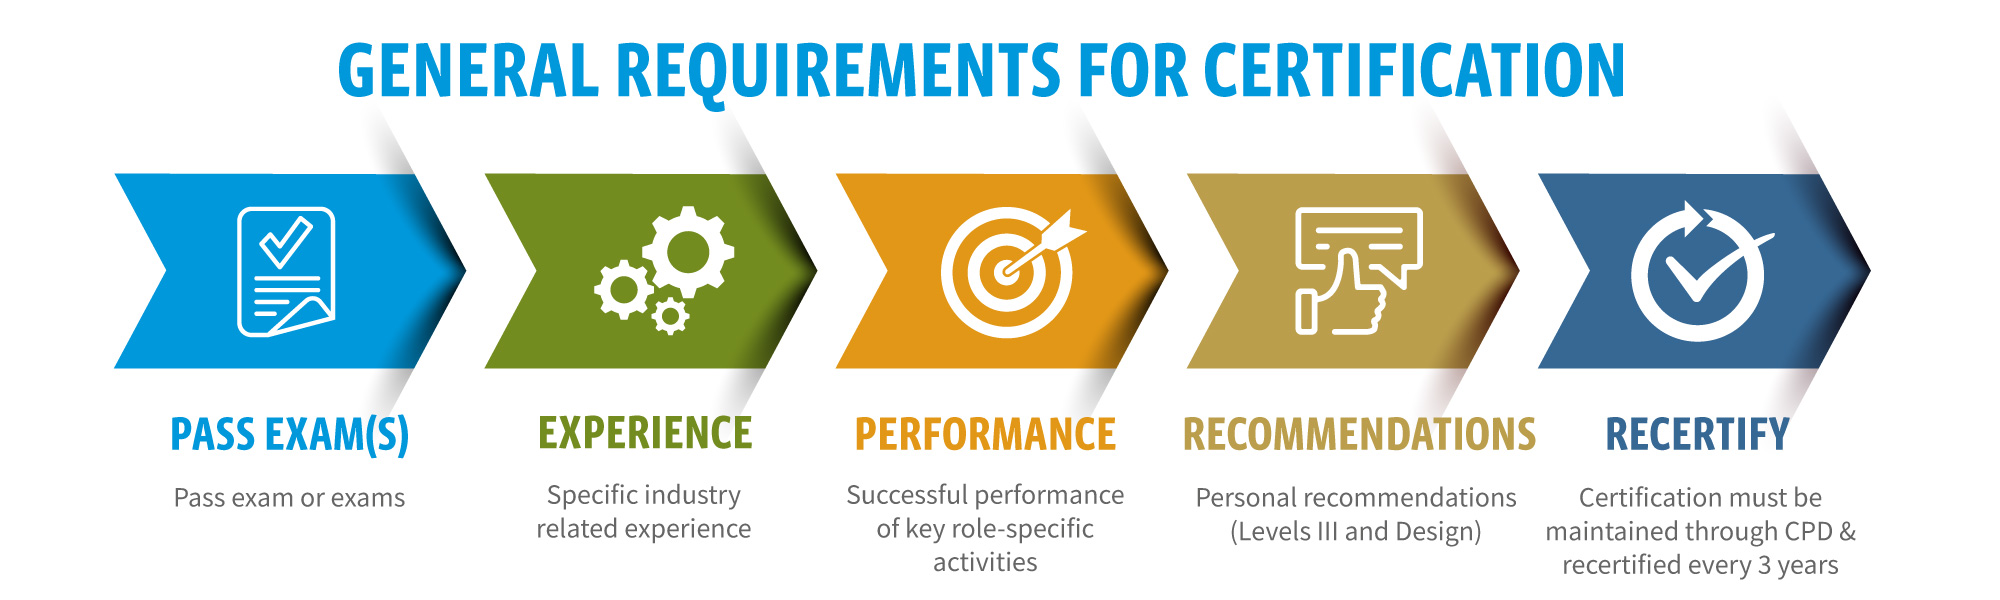 Genearl Requirements for Certification